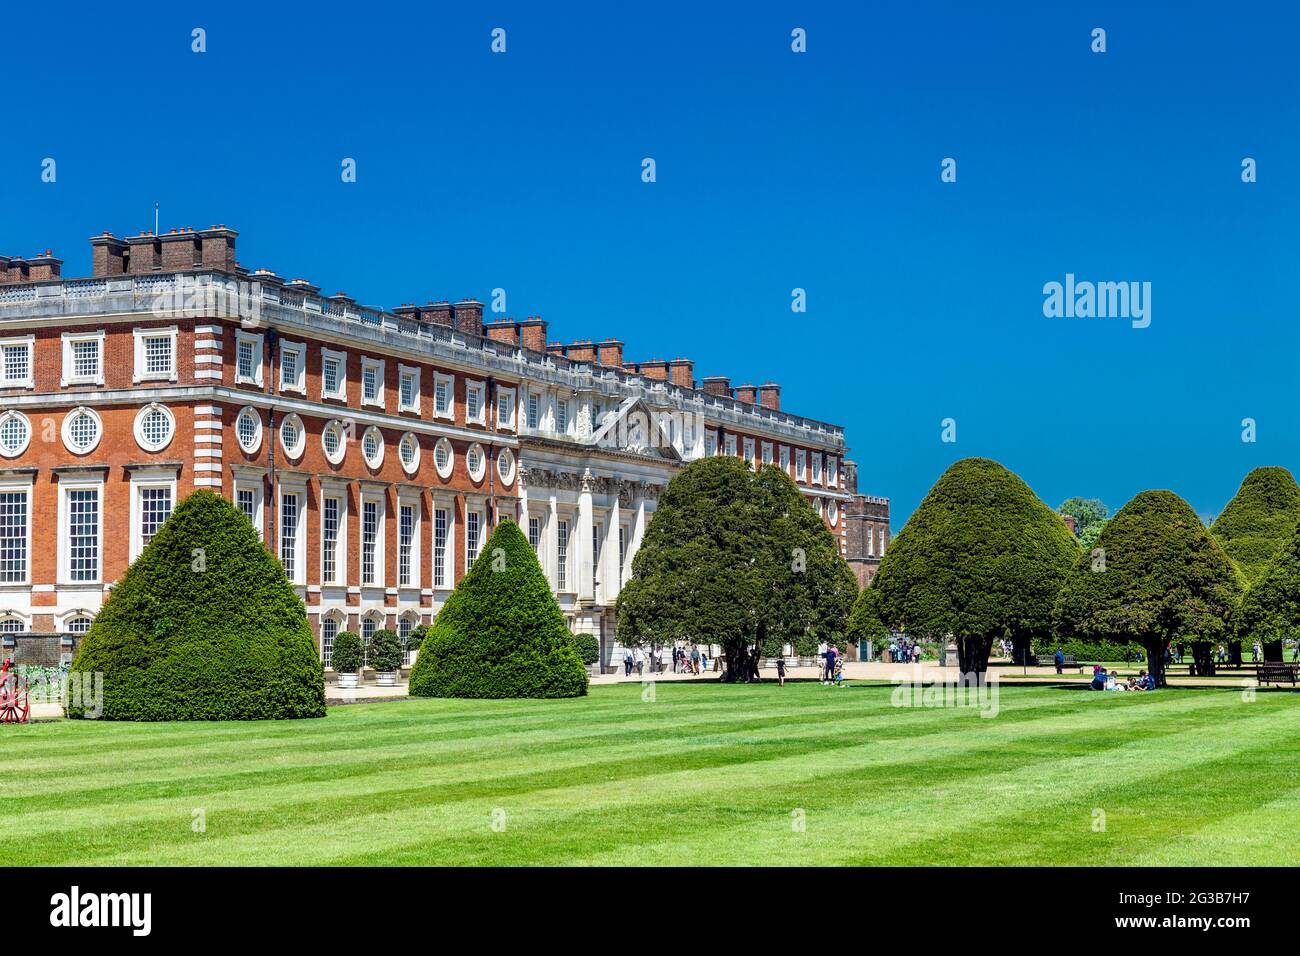 View of the baroque part of the palace from the Great Fountain Garden at Hampton Court Palace, Richmond, London, UK Stock Photo